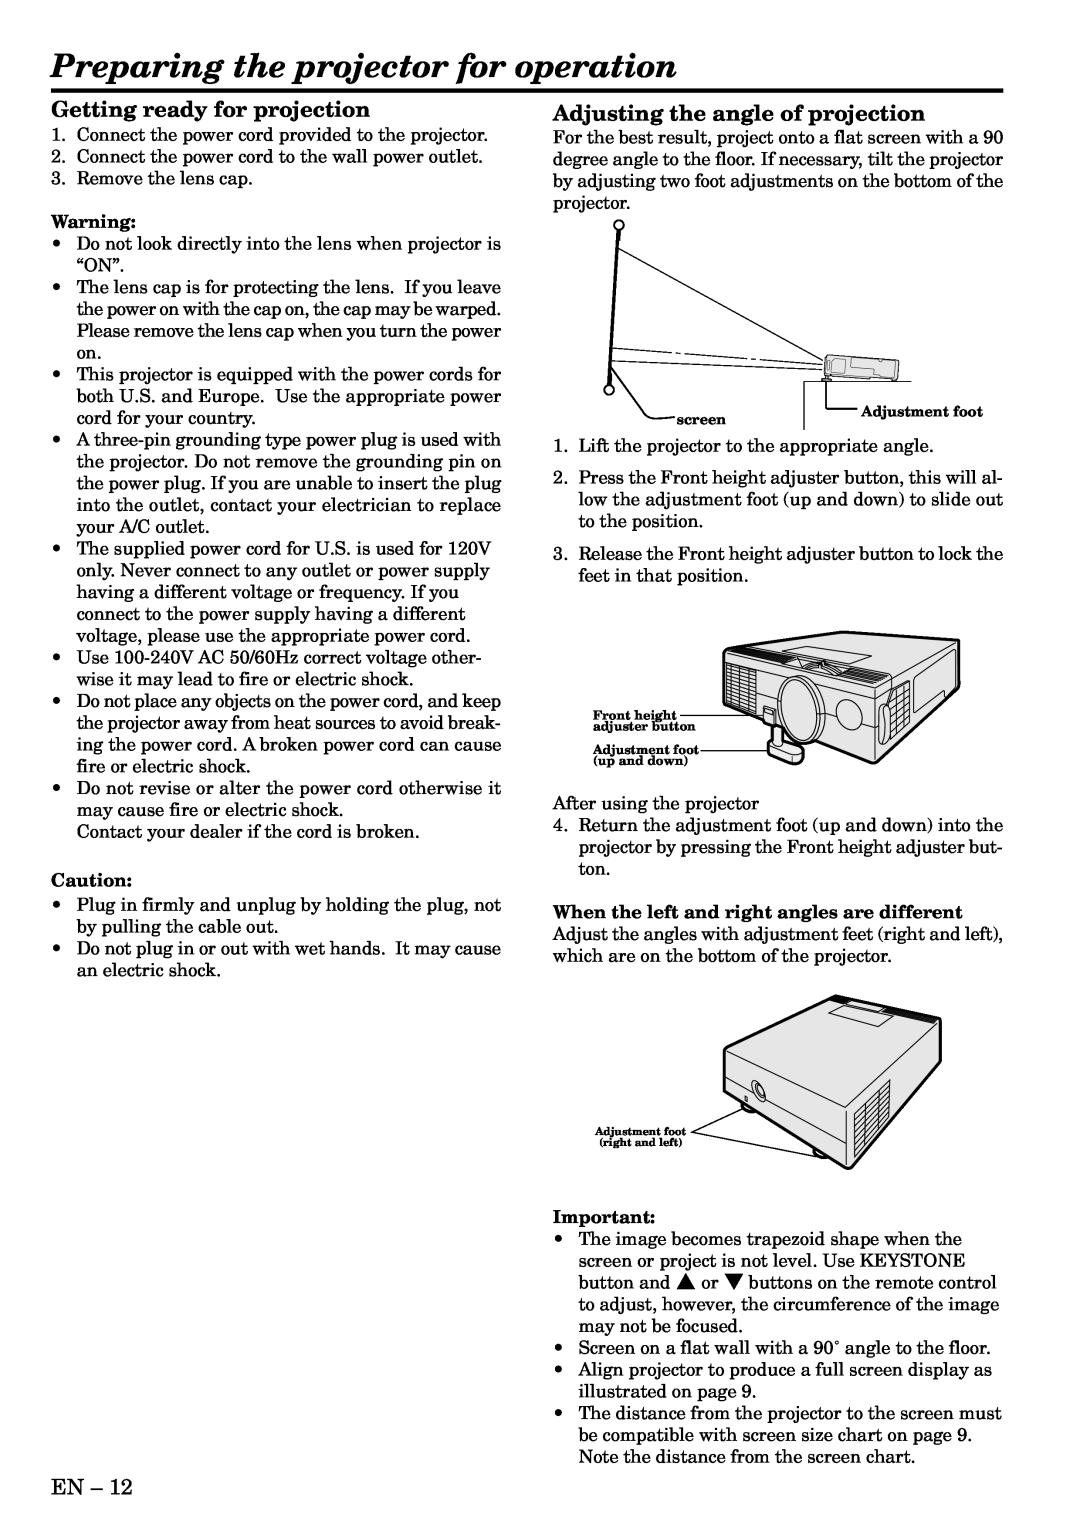 Mitsubishi Electronics X70B user manual Preparing the projector for operation, Getting ready for projection 